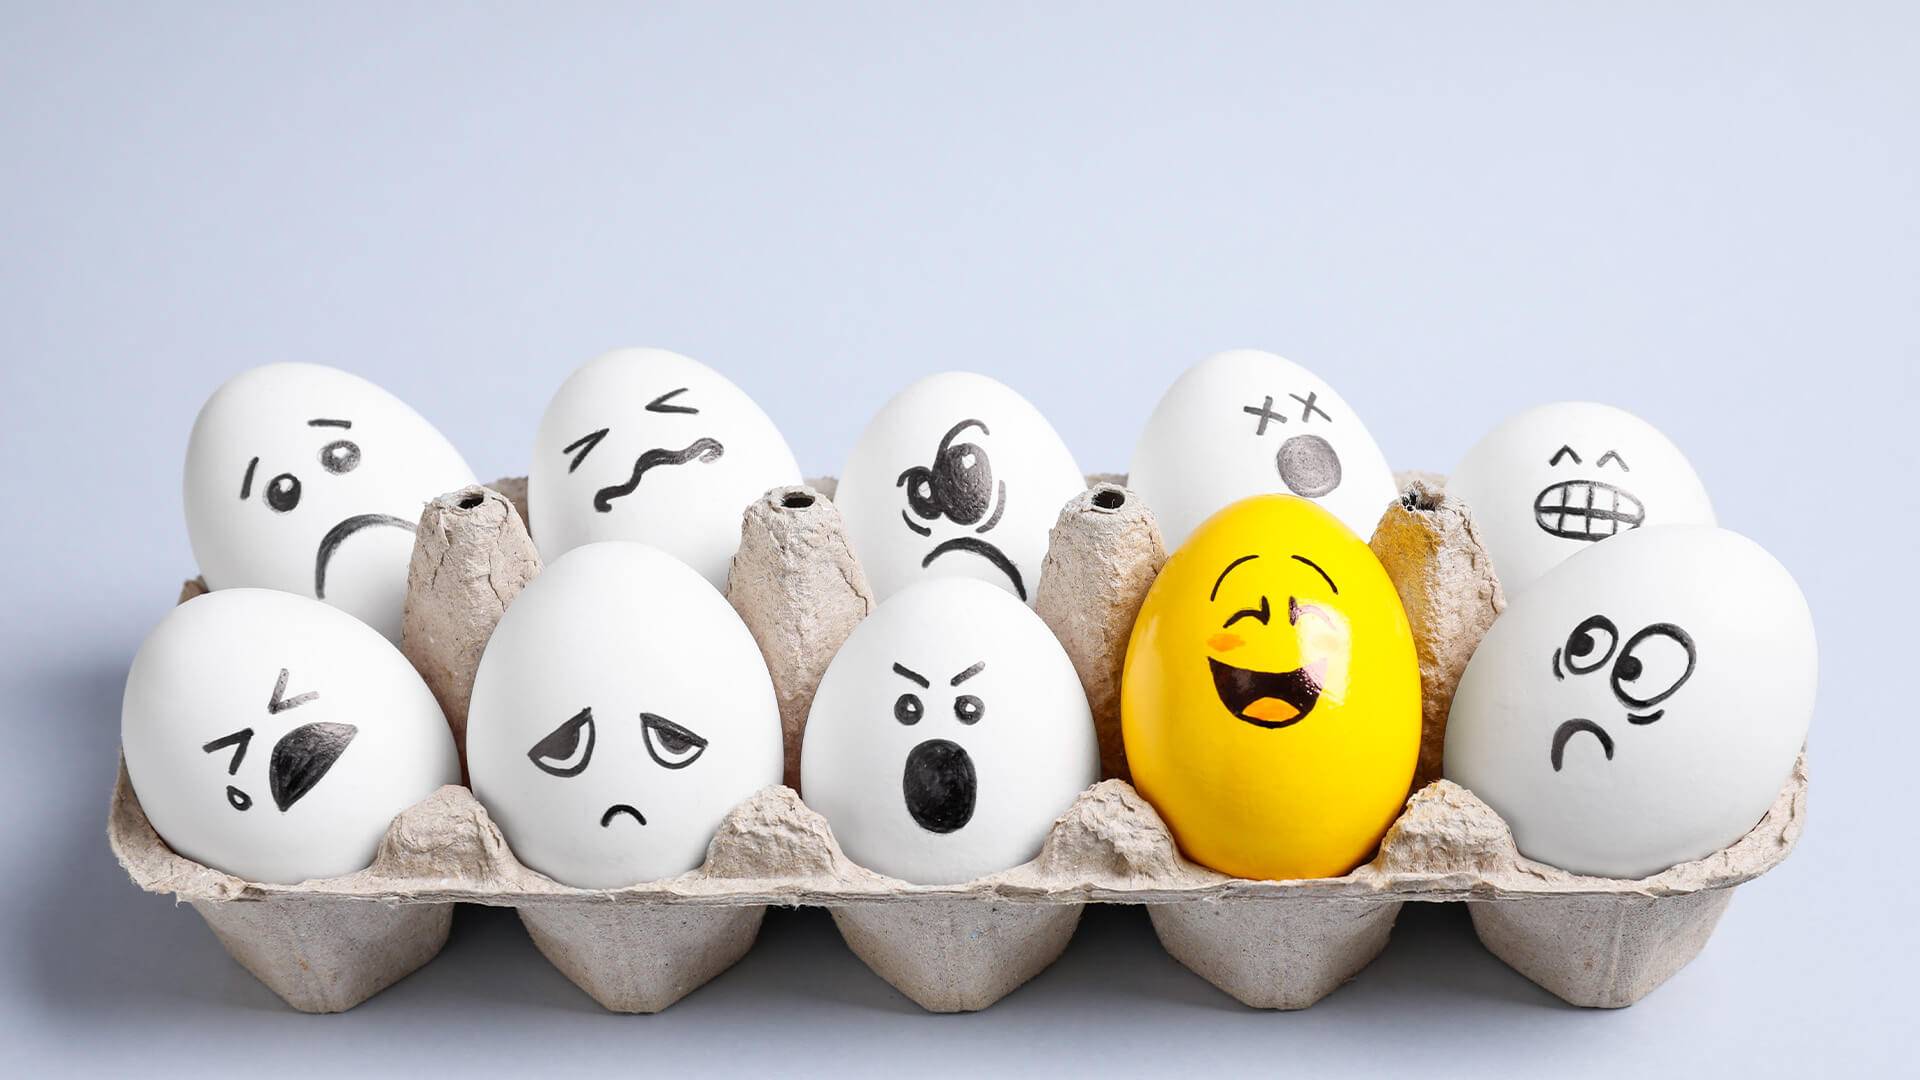 Yellow smiley egg among others with negative emotions in package on light background